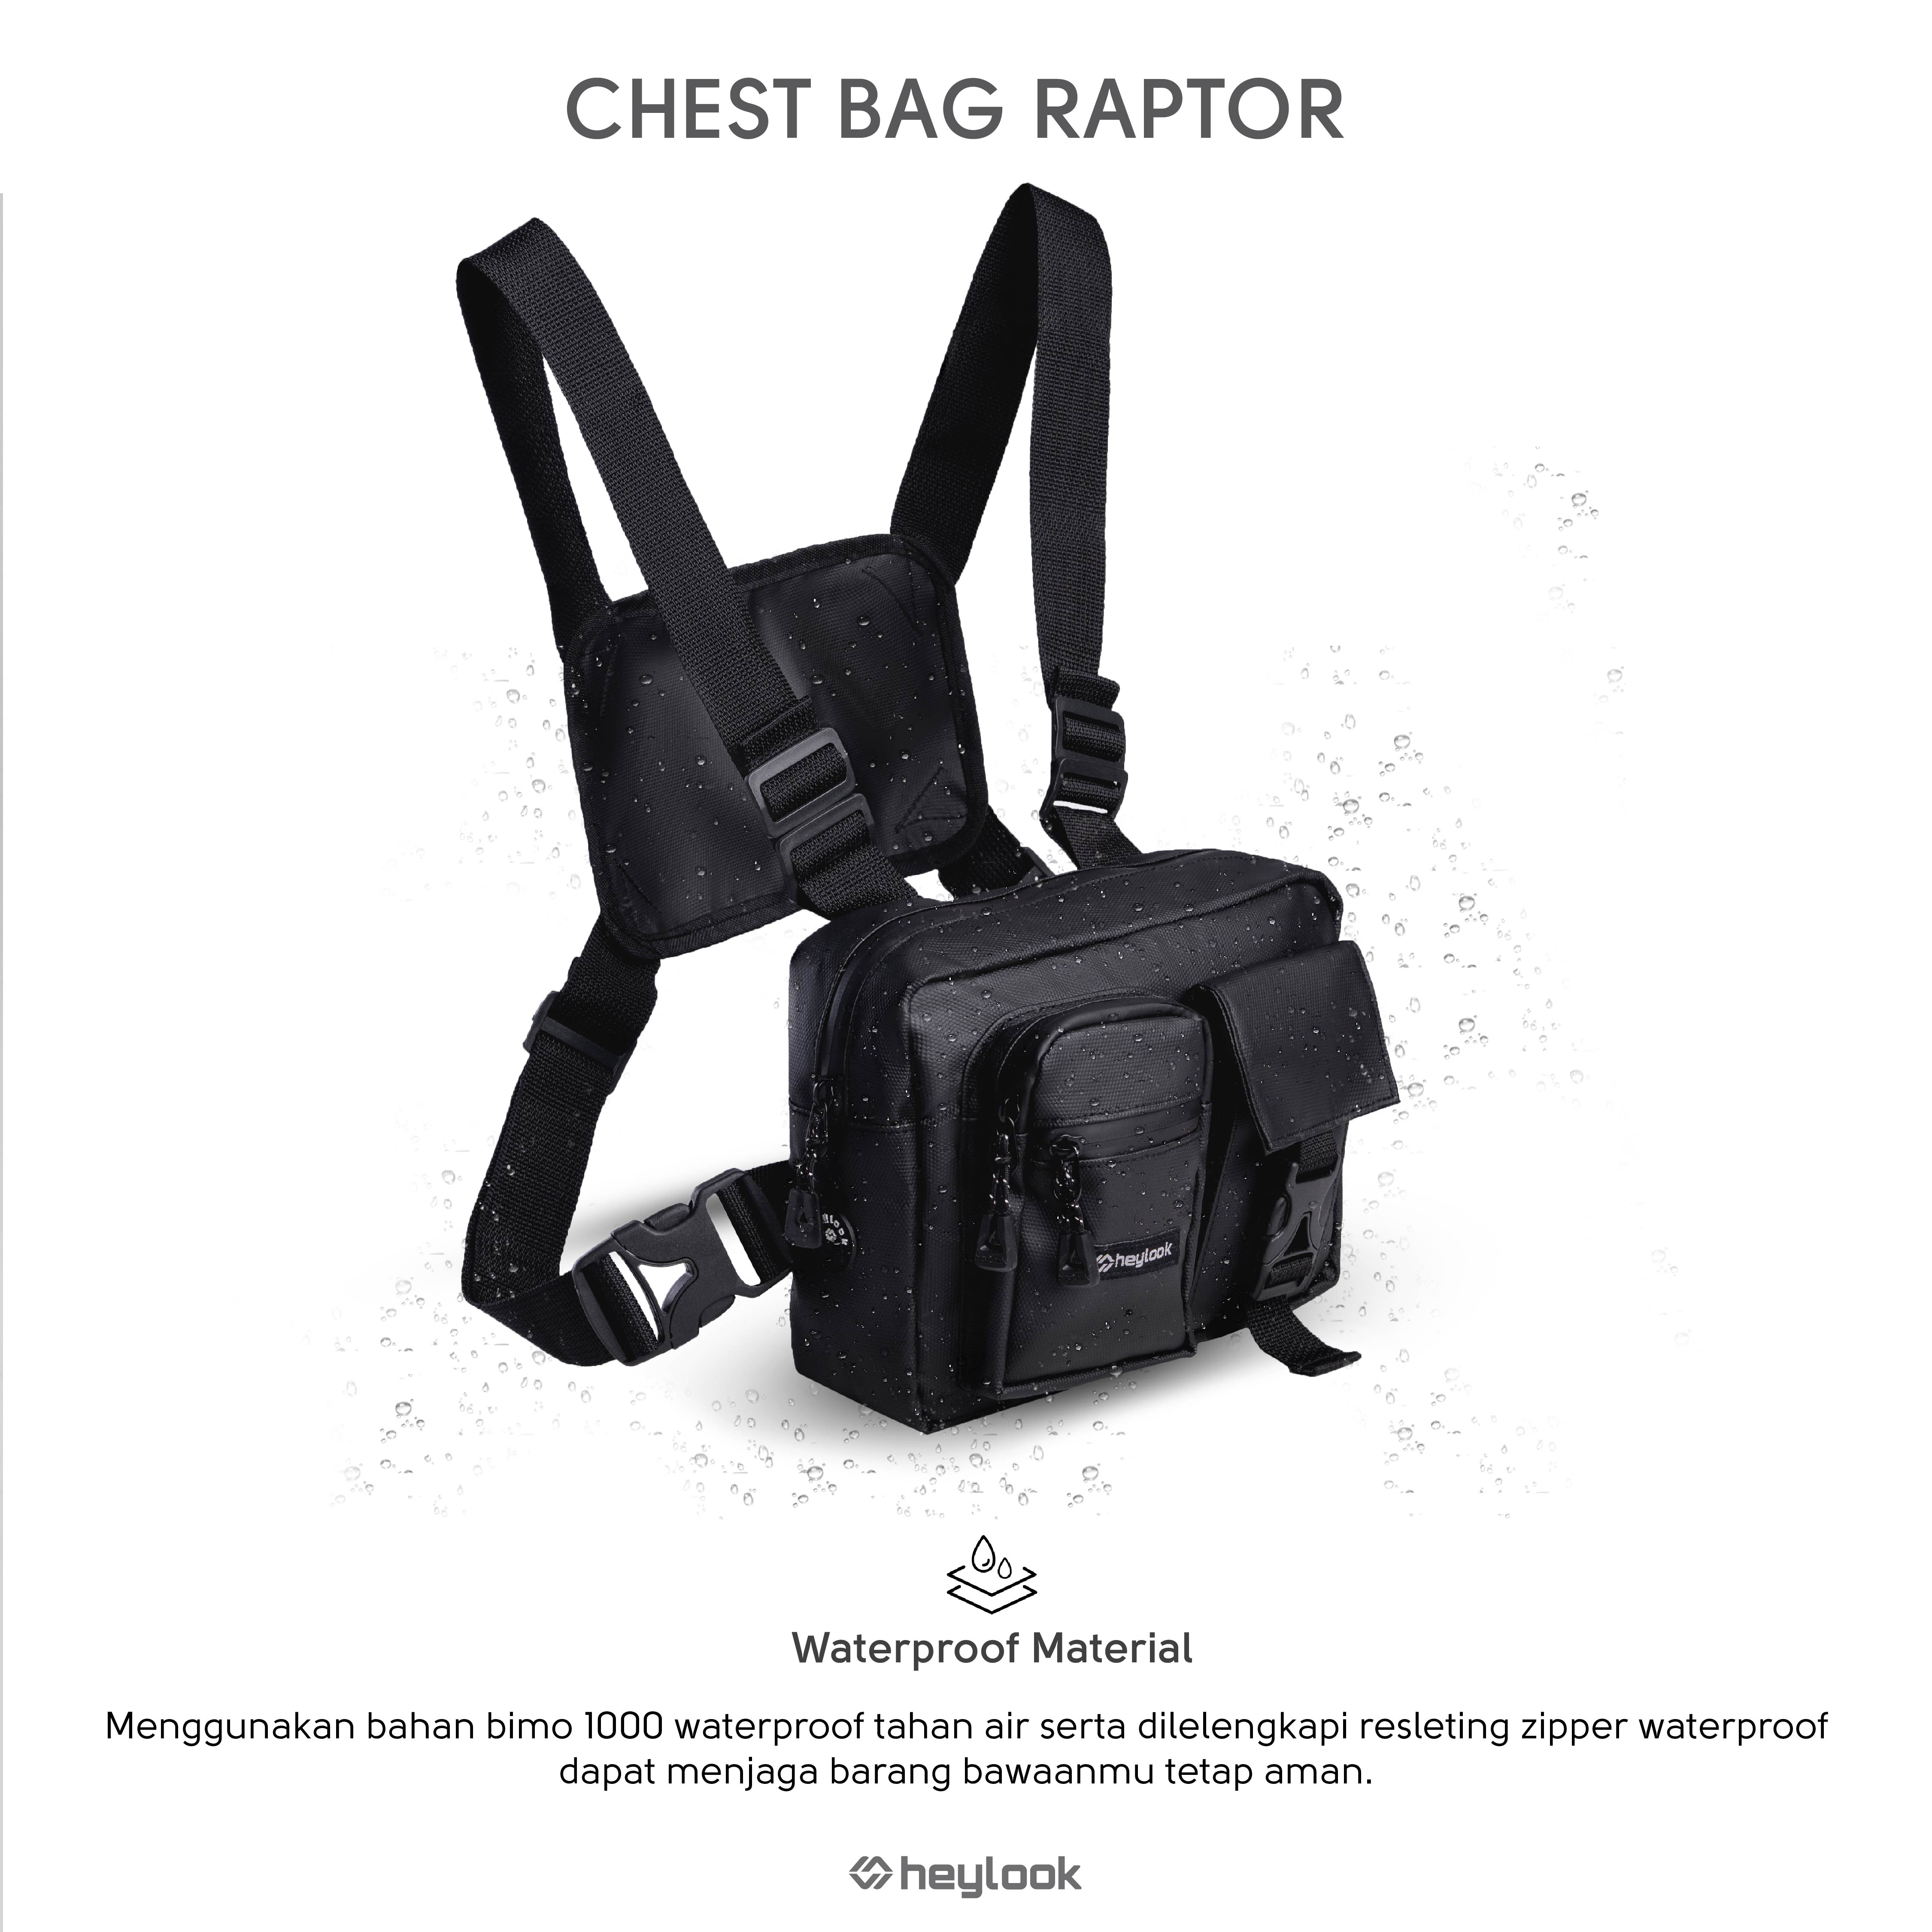 Chest bag waterproof Raptor chest bag tactical bag outdoor rigs  heylook-able to pay on the [cod]